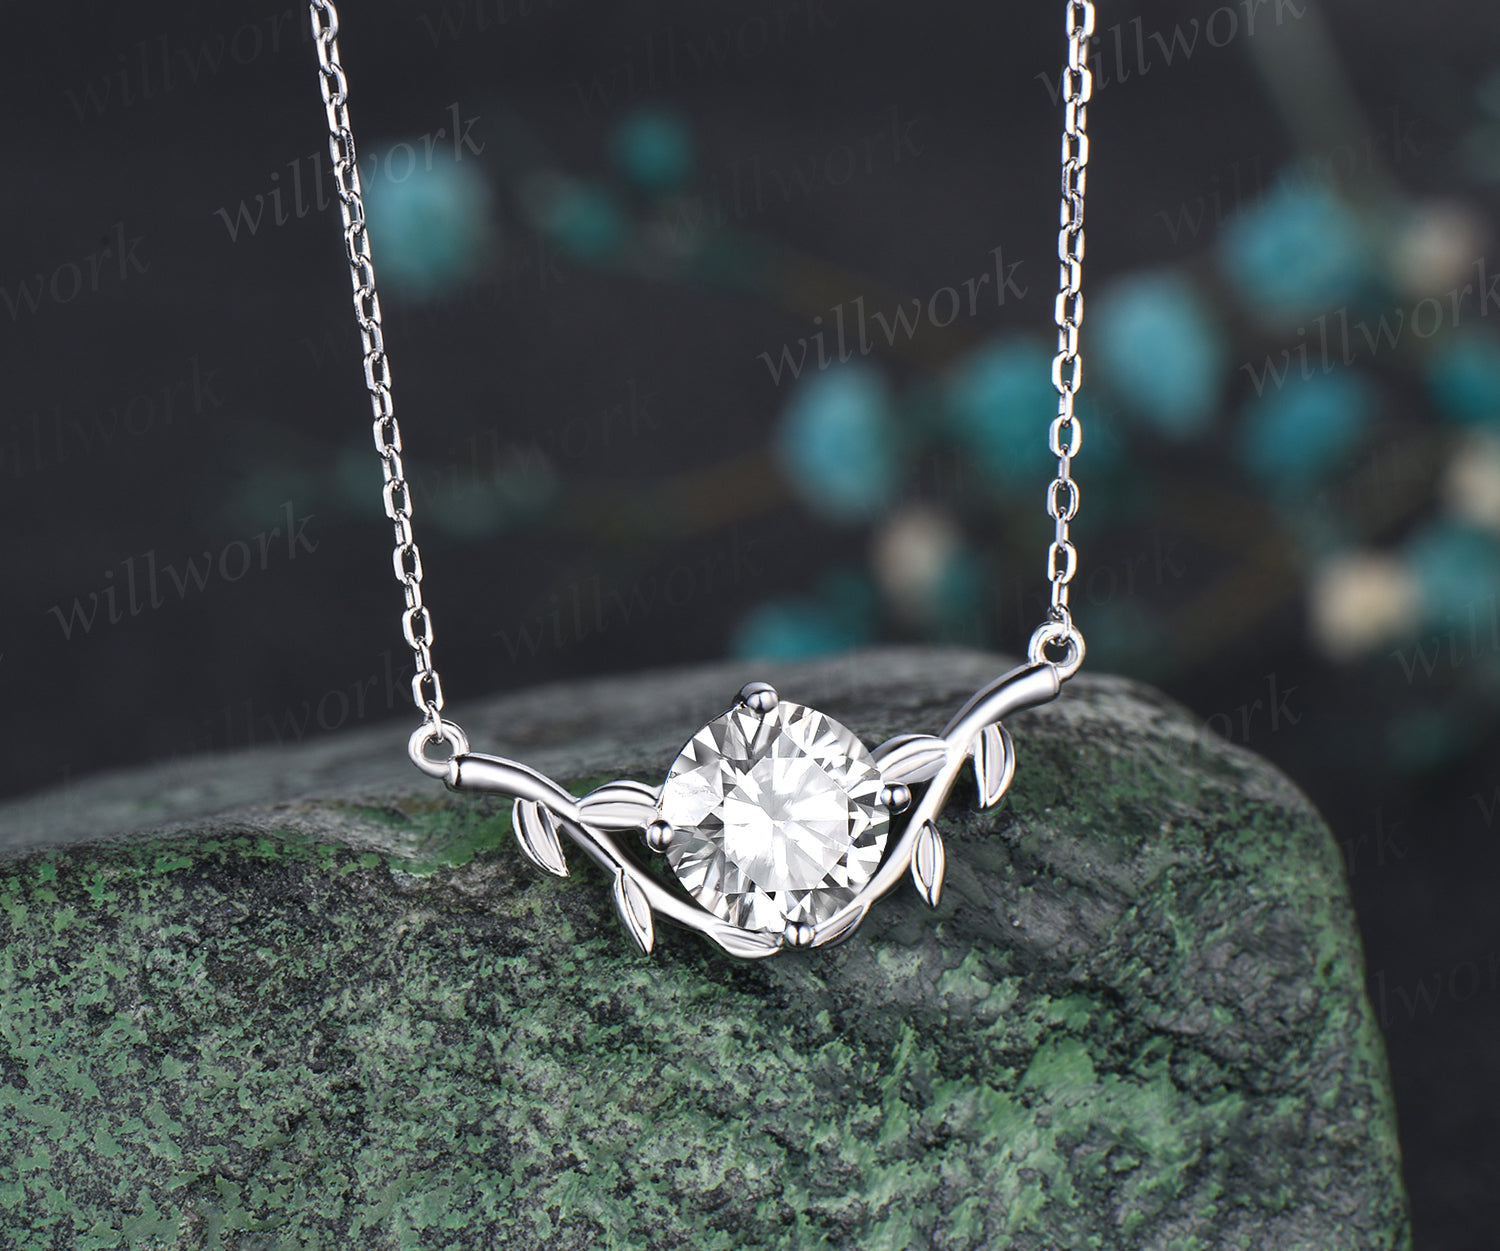 Dainty Quinceañera Star Pendant Necklace in Two Tone White Gold